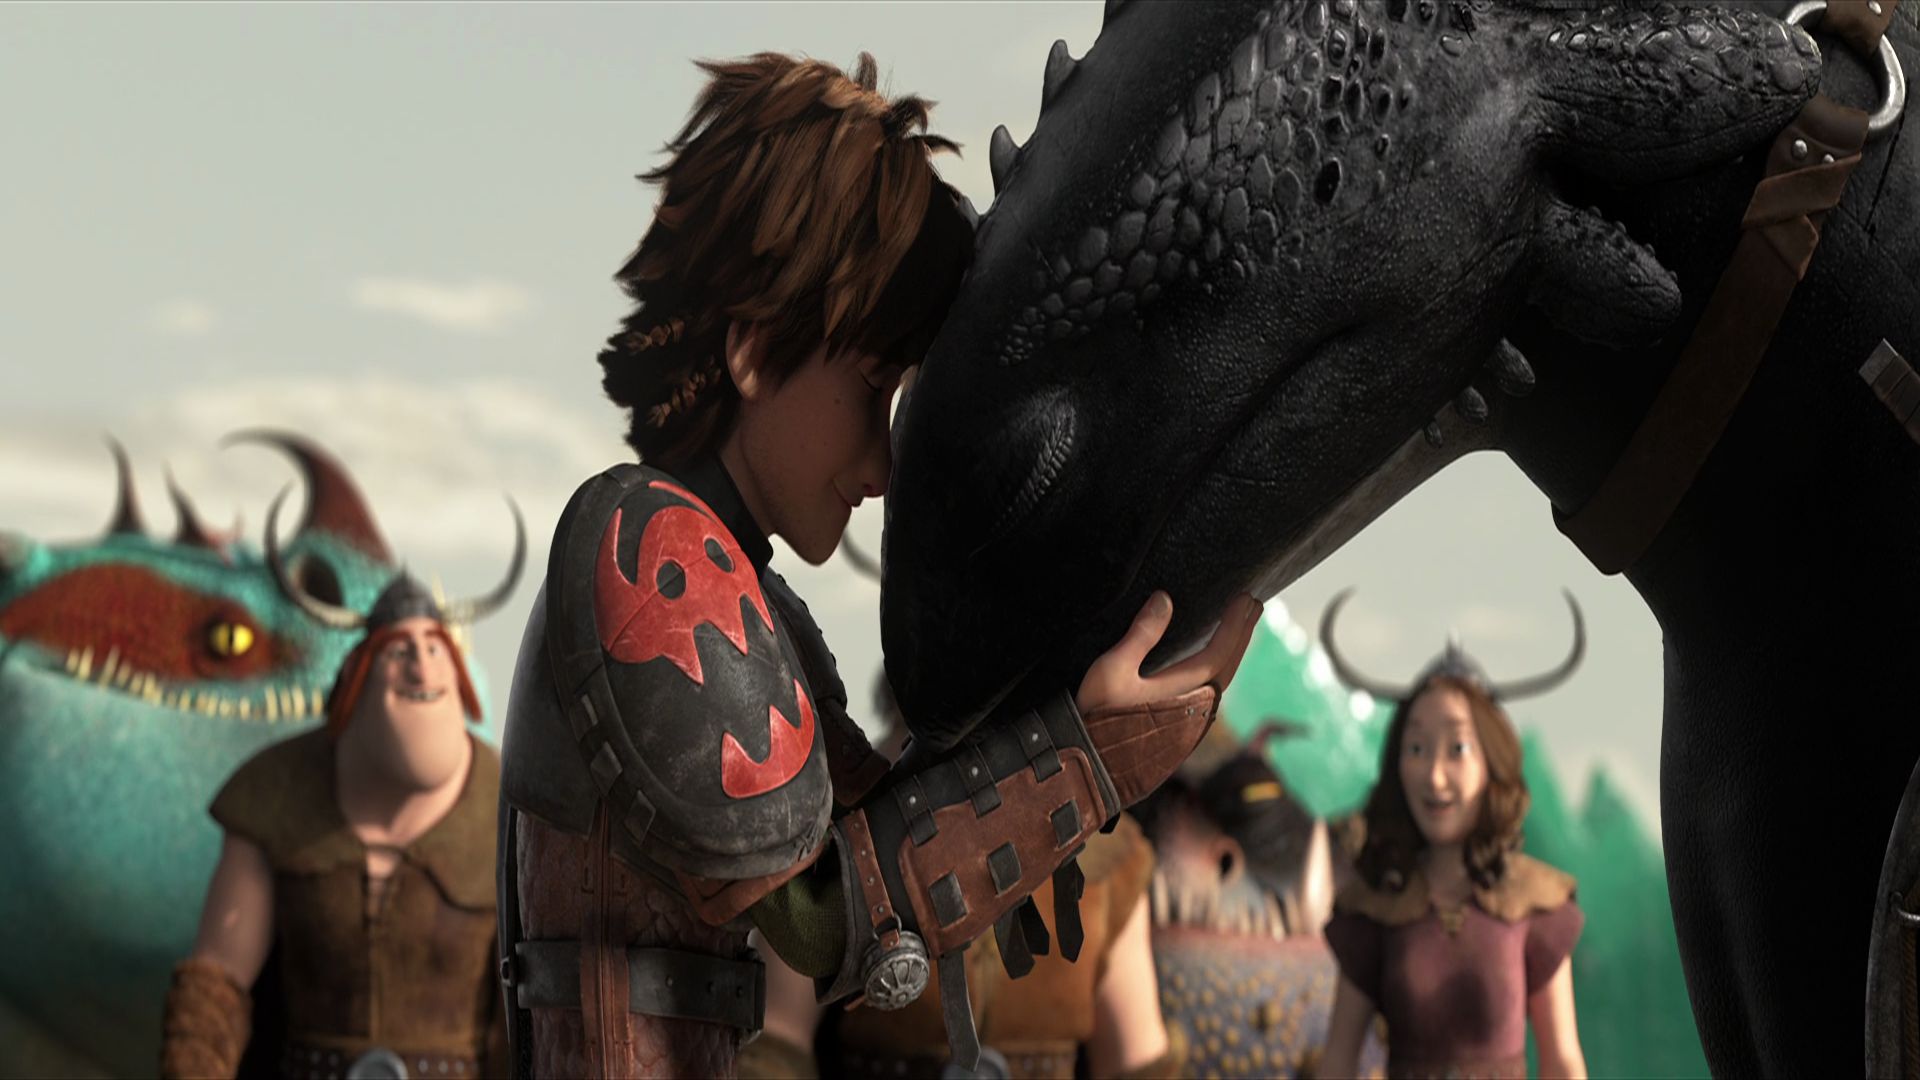 movie, how to train your dragon 2, hiccup (how to train your dragon), toothless (how to train your dragon), how to train your dragon